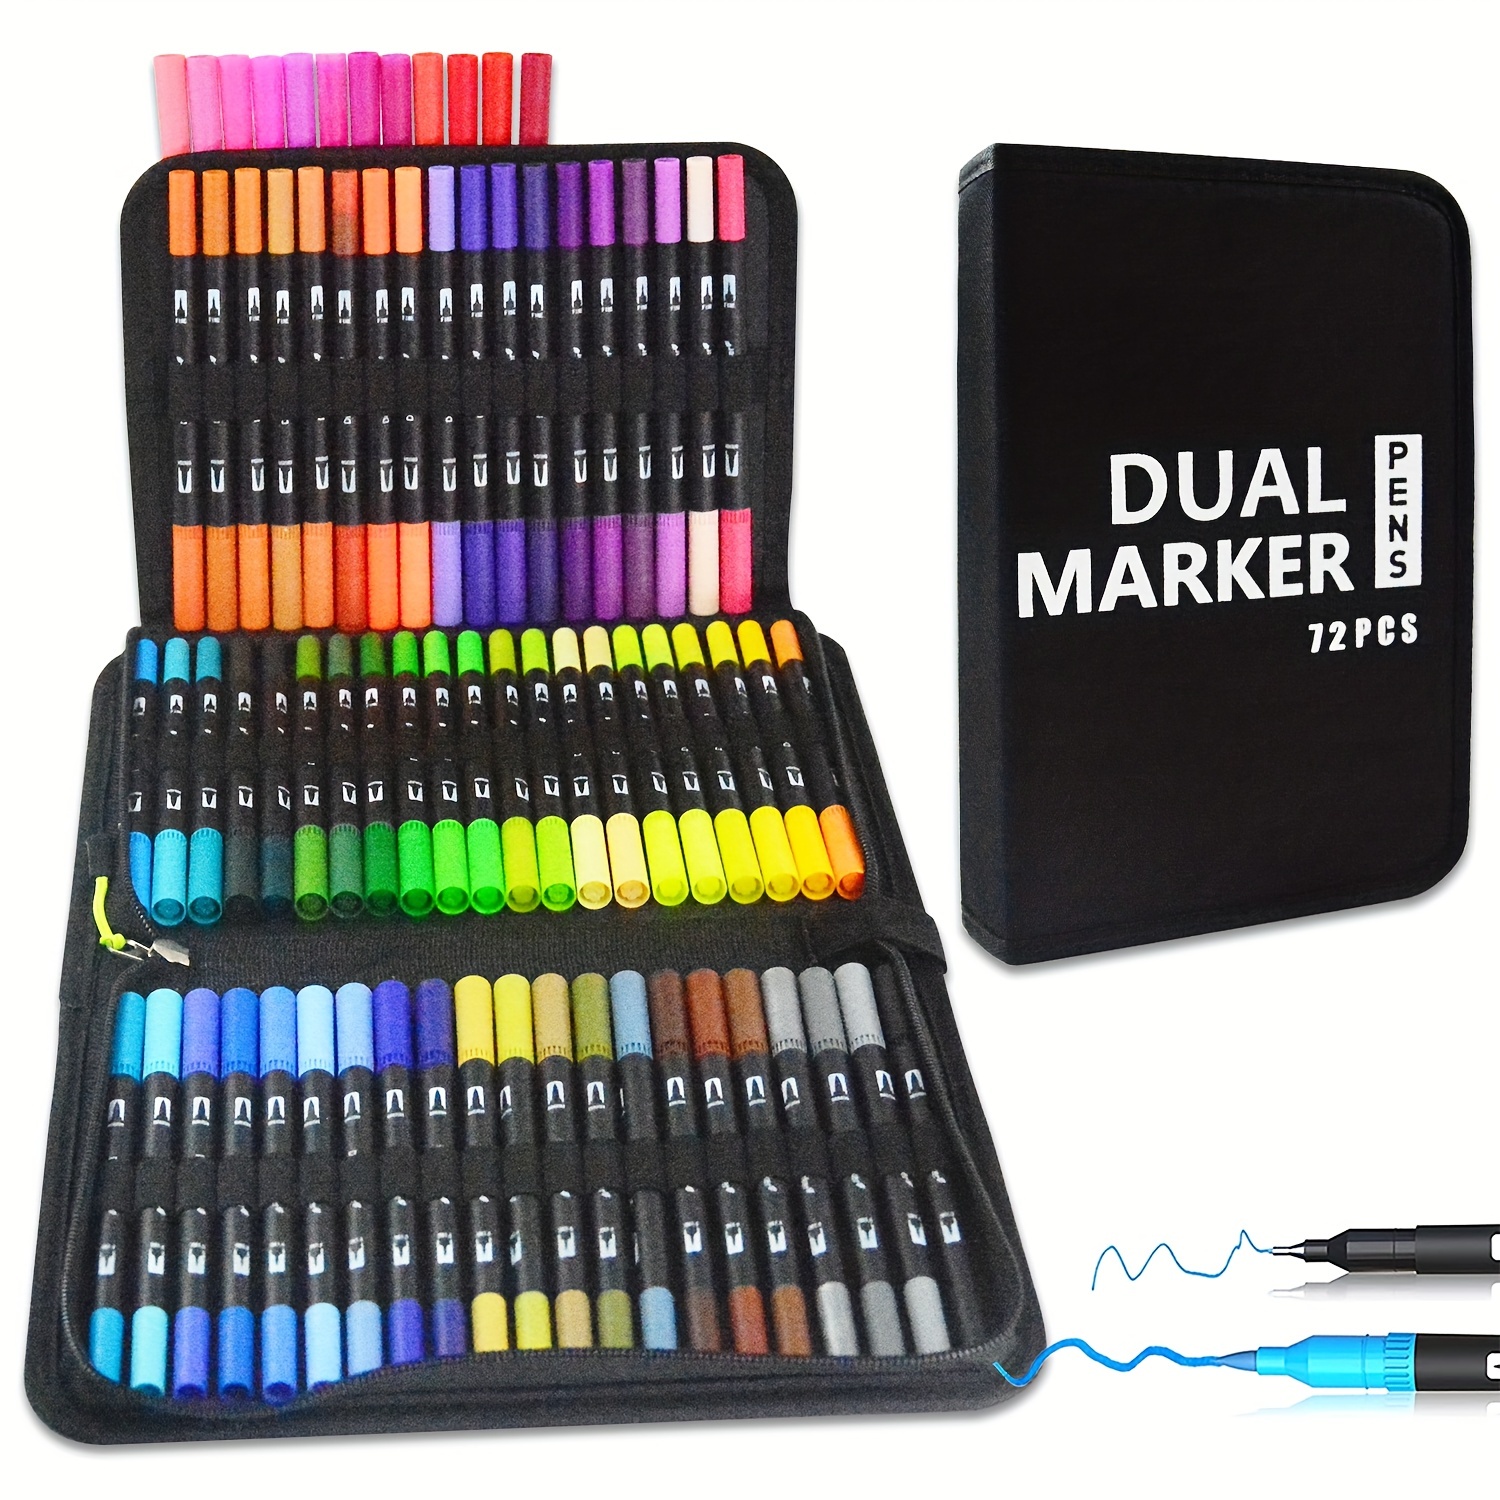 Coloring Markers Pens Set for Adult Coloring Book, 72 Colors Dual